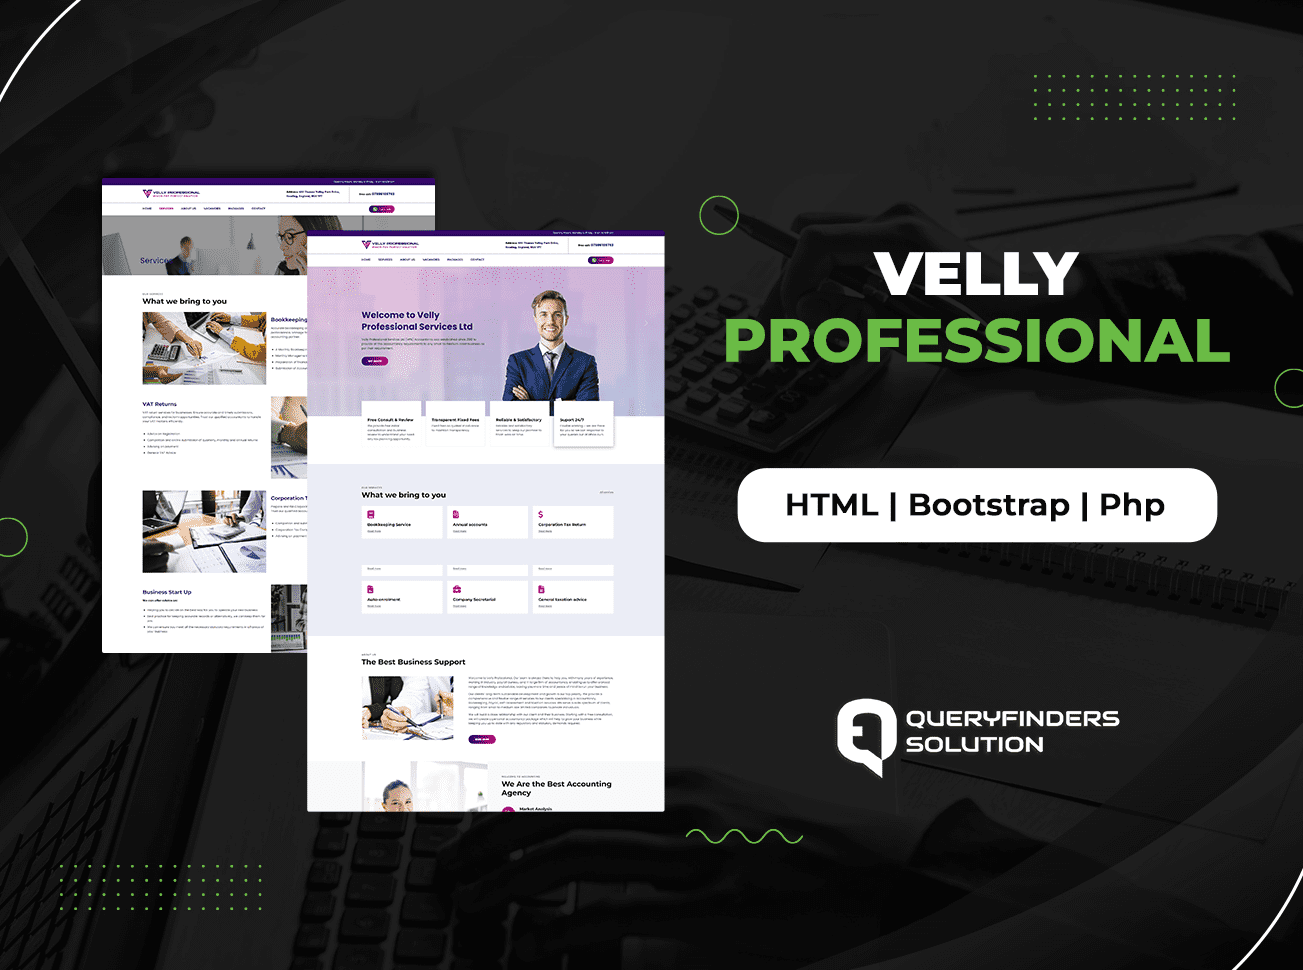 Velly Professionals